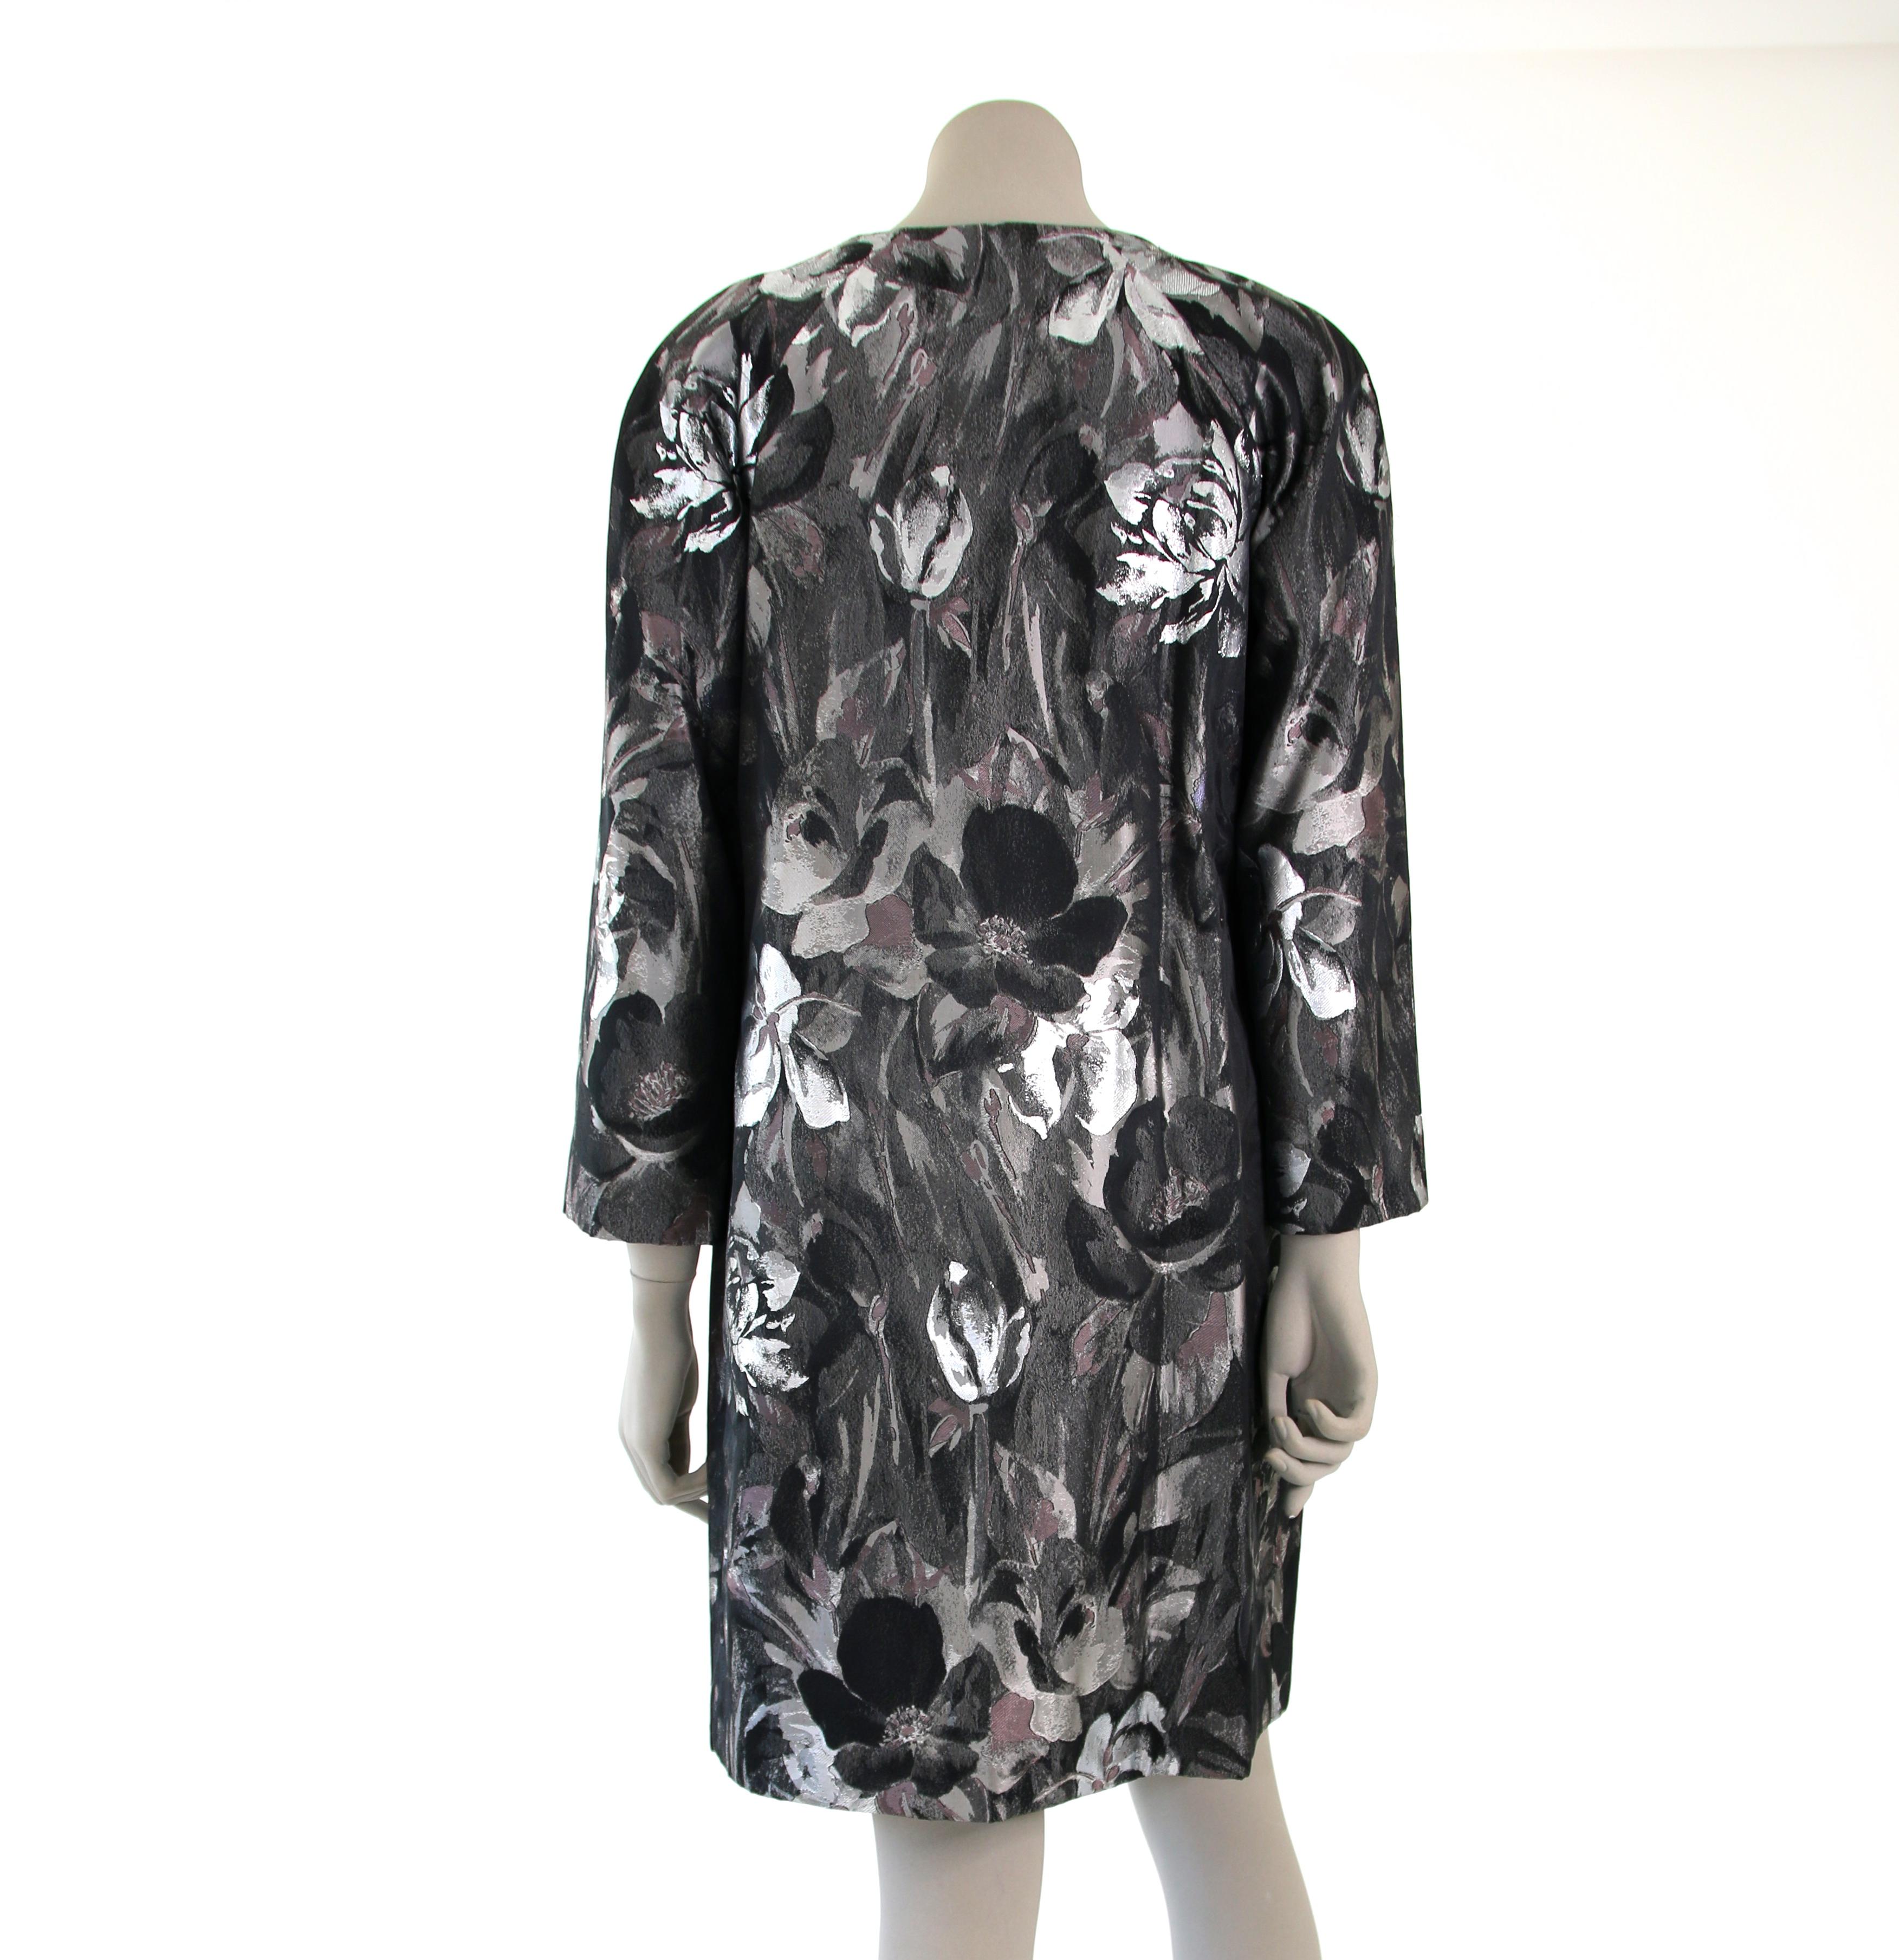 Pelush Black and Silver Brocade Printed Flower Coat - XS For Sale 2